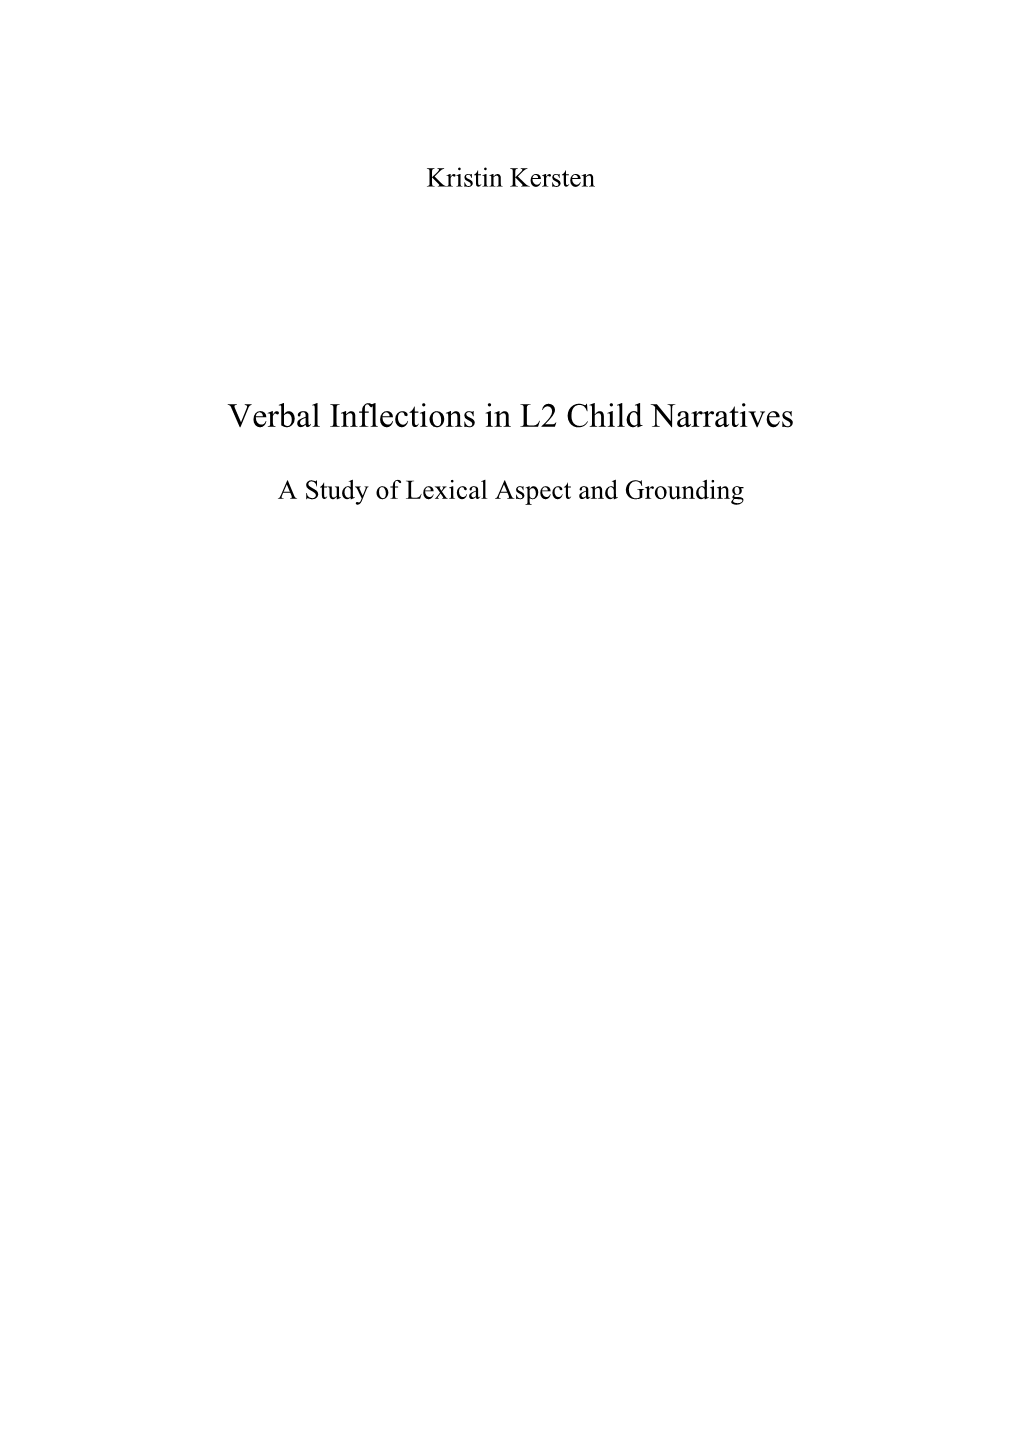 Verbal Inflections in L2 Child Narratives